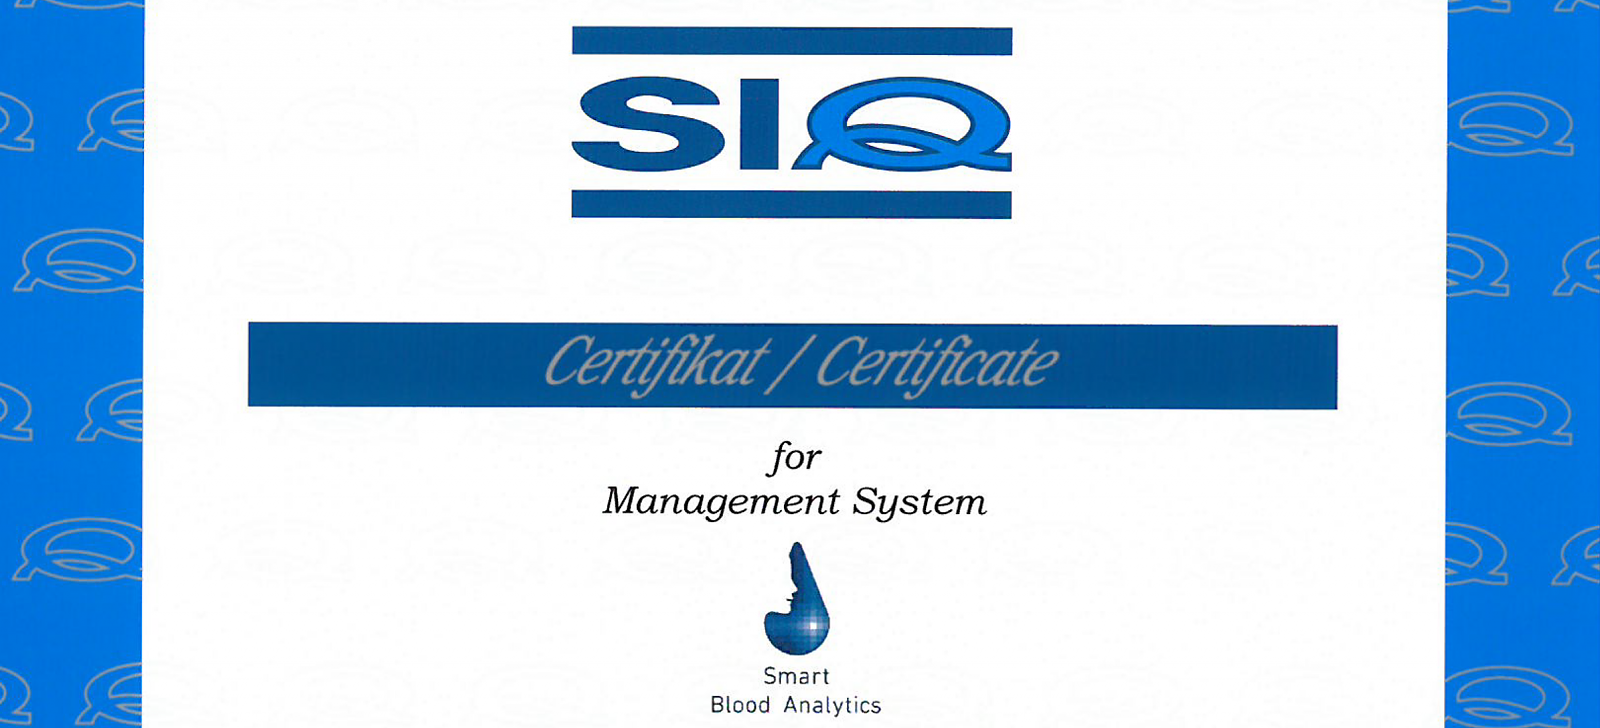 ISO 13485 Re-certification